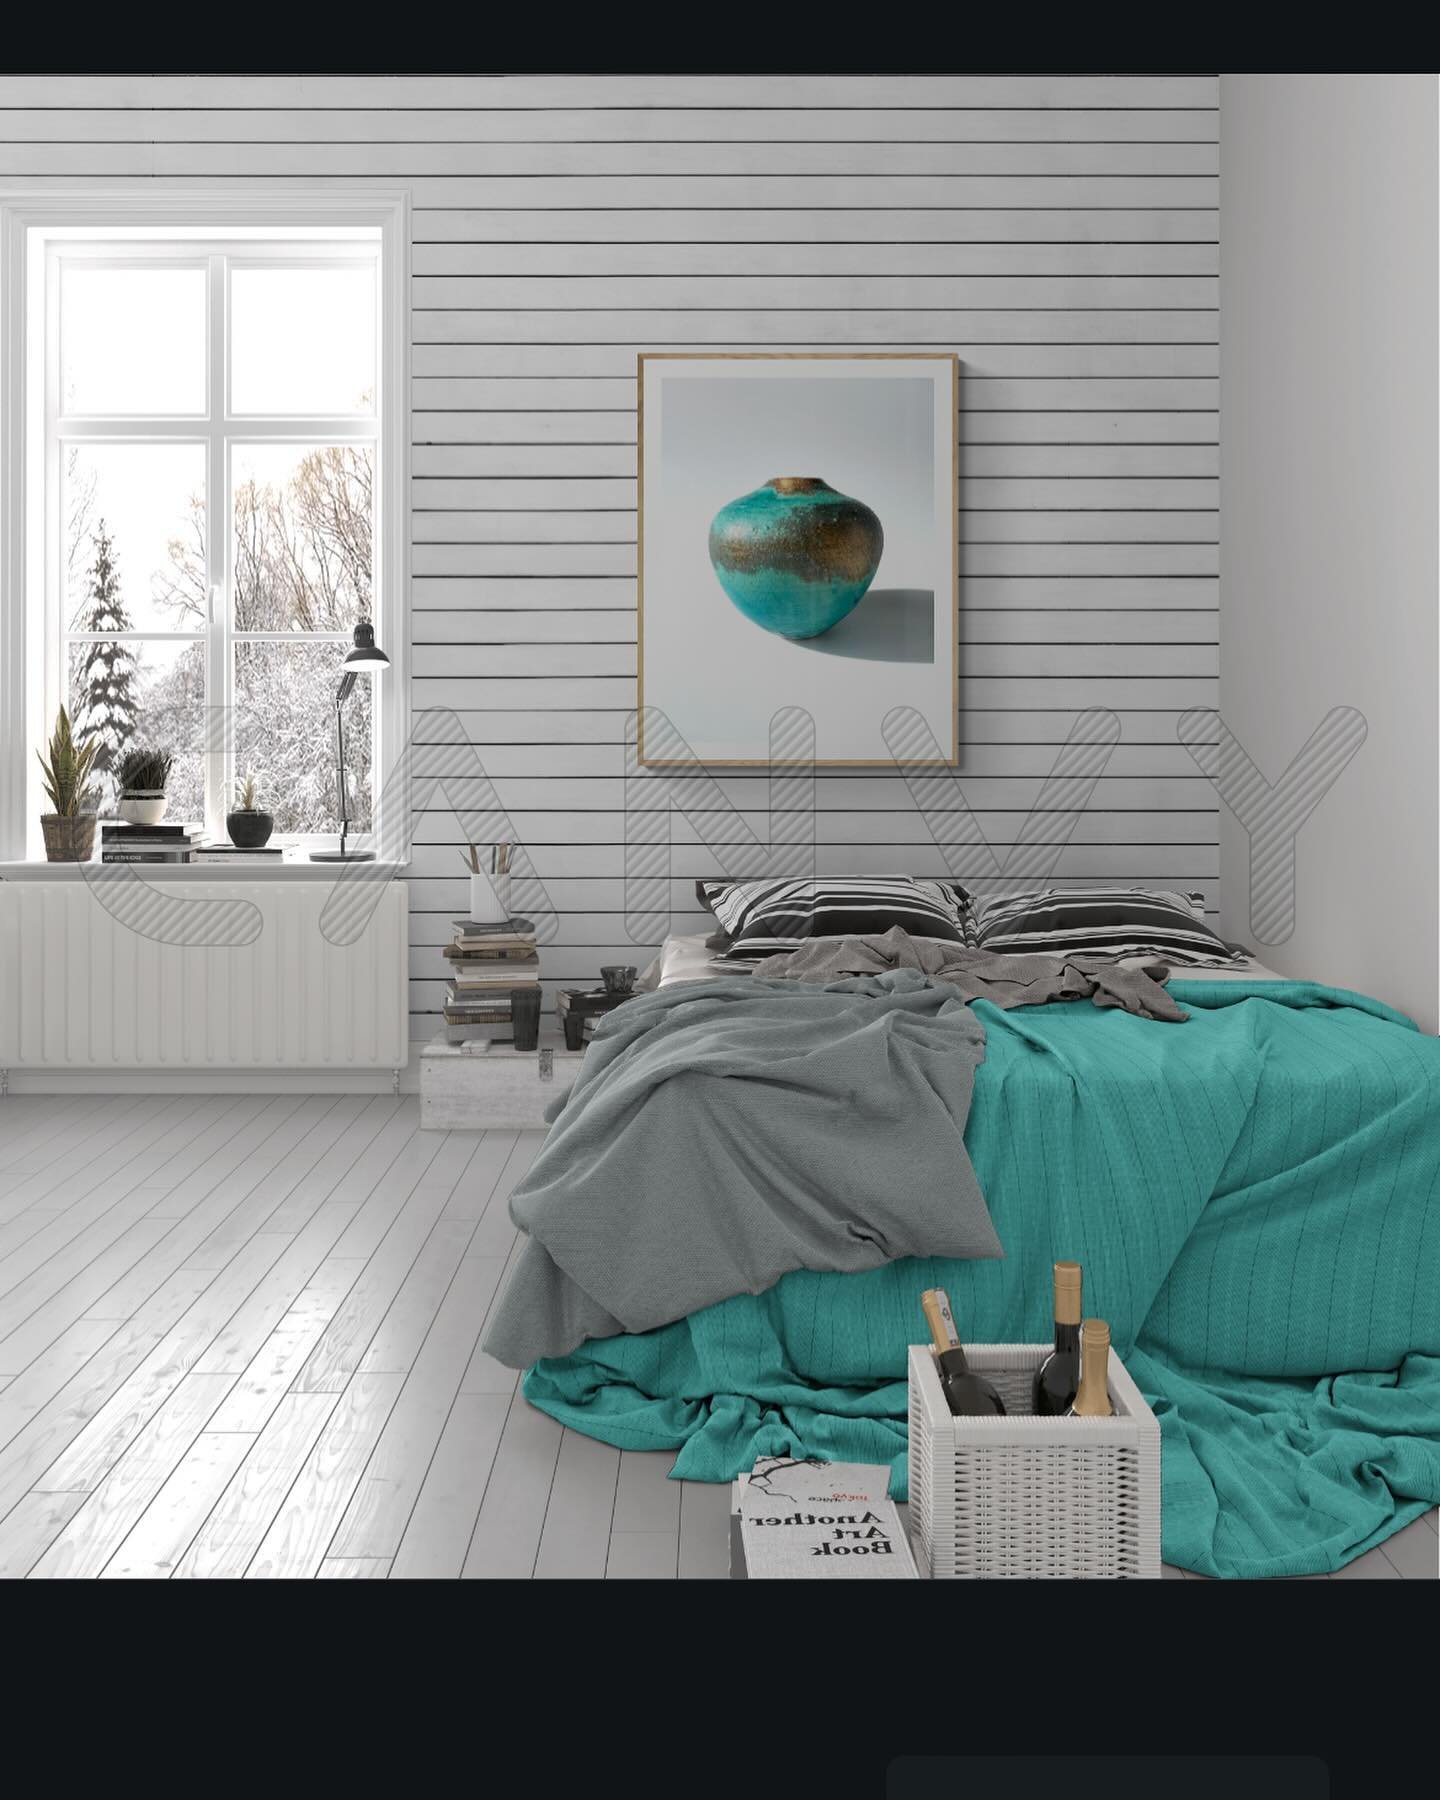 Having a play with @canvy to see how photography of my pots would look like as a print in different interiors. I&rsquo;m liking the bedroom vibe 😄this pot is very small in reality. 
 #interiordesign #pottery #oceaninspired